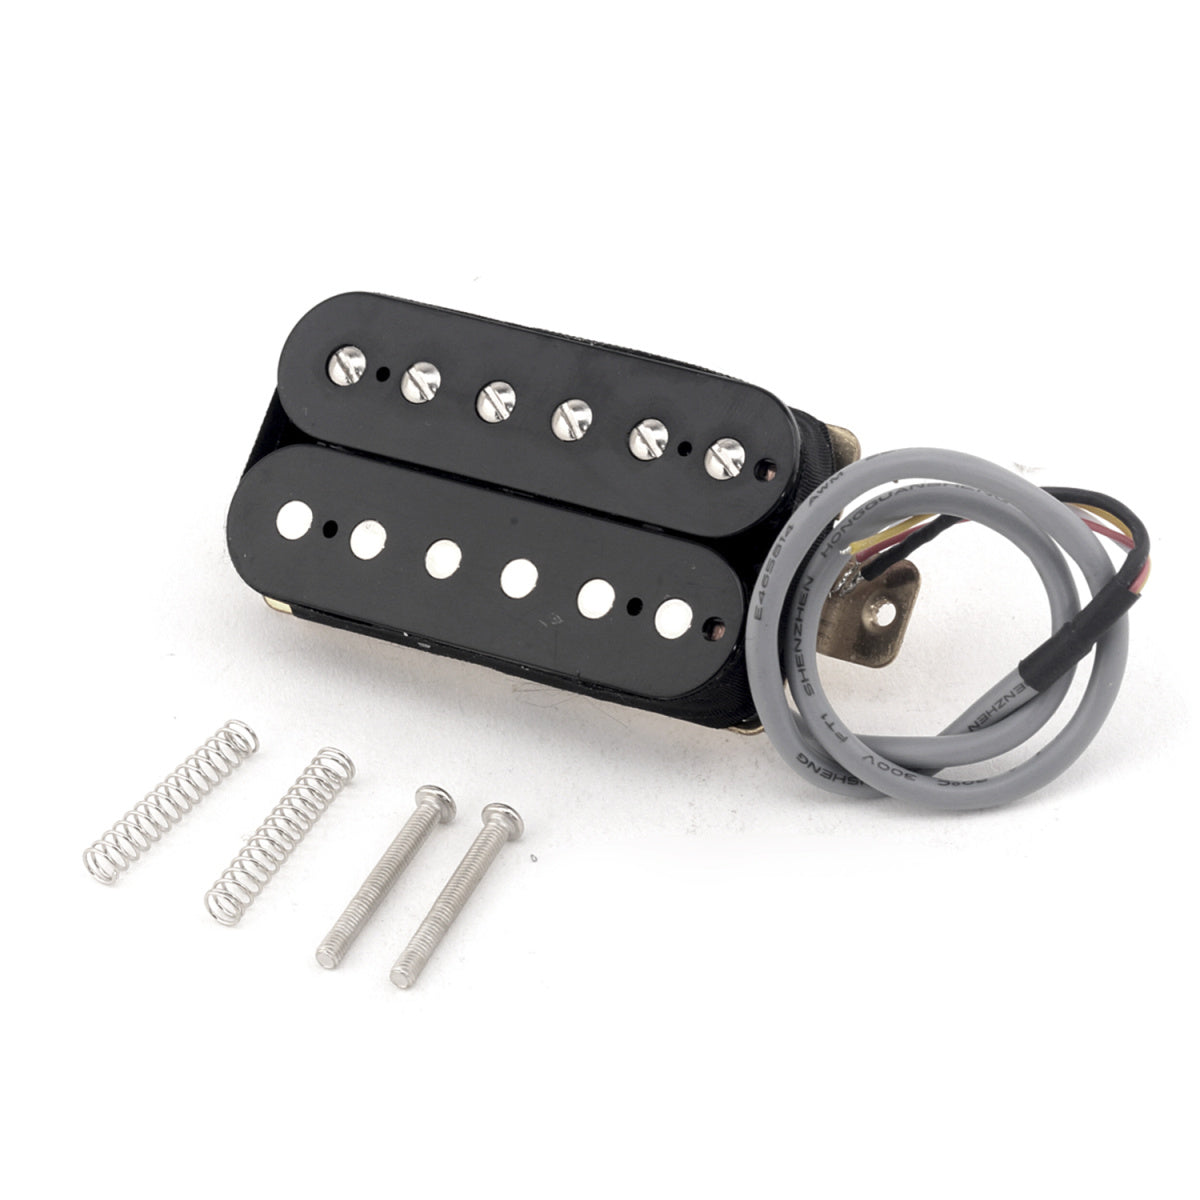 Musiclily Pro 50mm Alnico 5 Humbucker Pickup for Electric Guitar Neck, Black